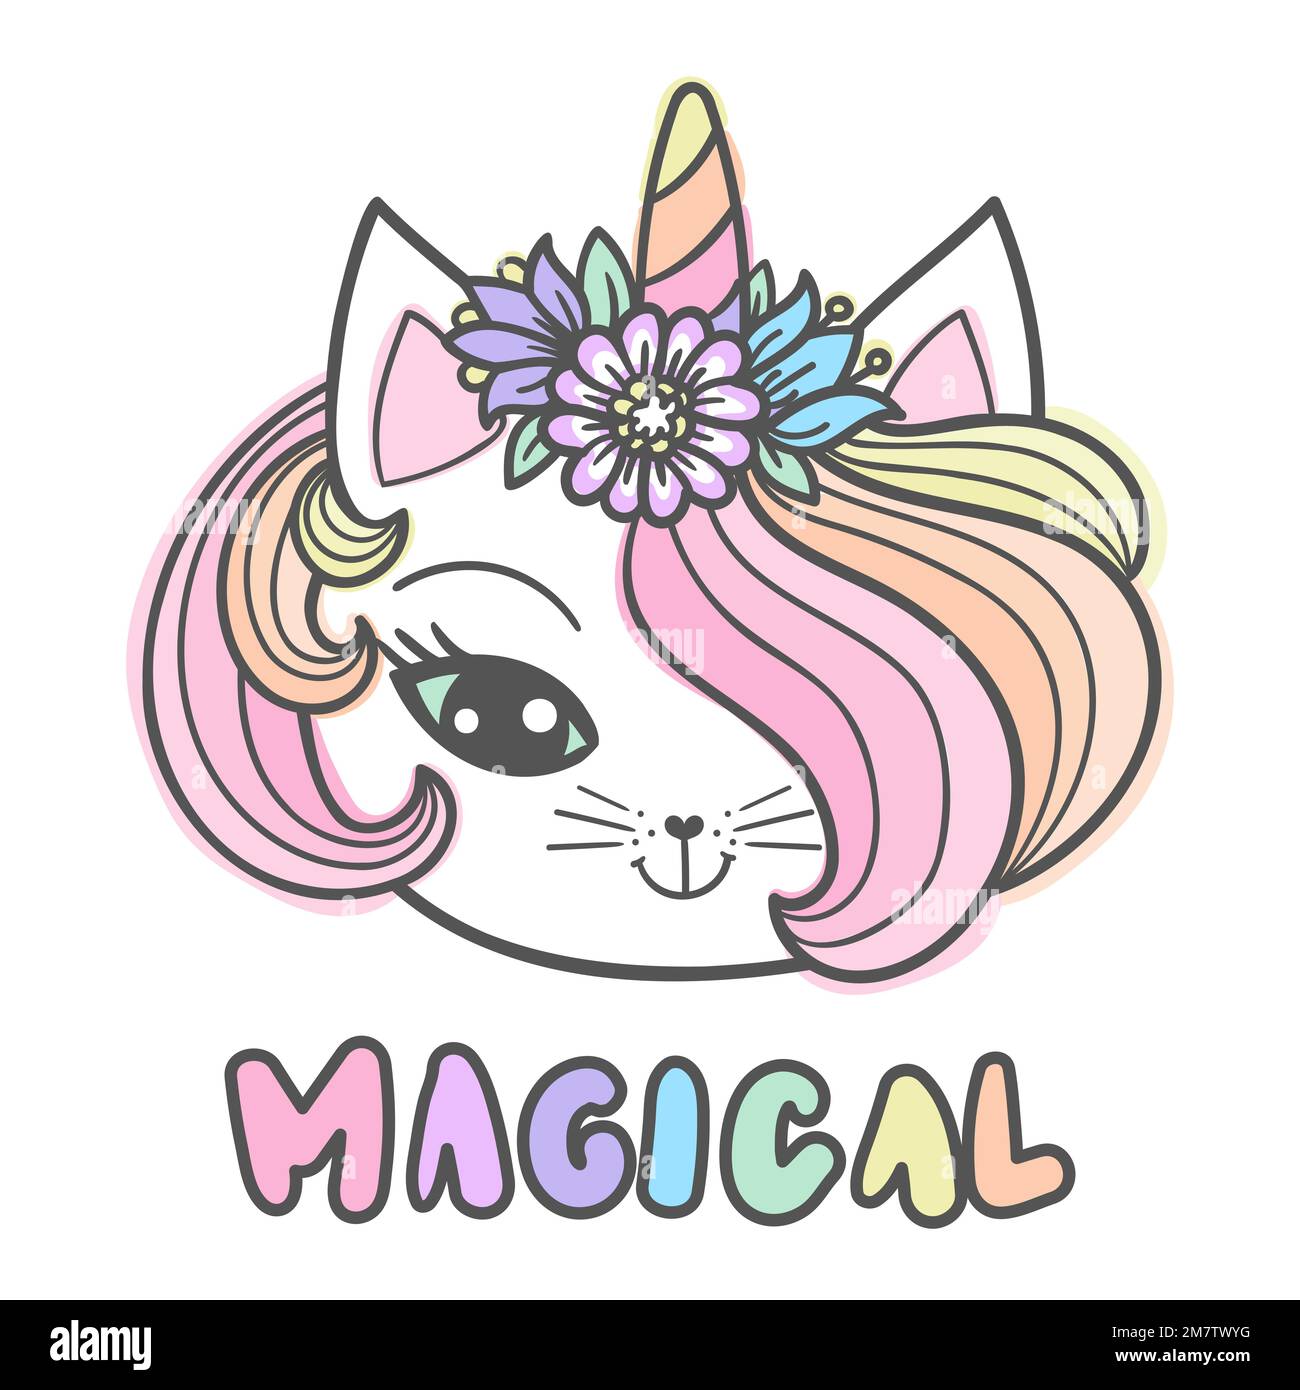 Unicorn cat head with flowers.Magic inscription. Doodle style. For children's design of prints, posters, cards, stickers, t-shirts, cups, etc. Vector Stock Vector